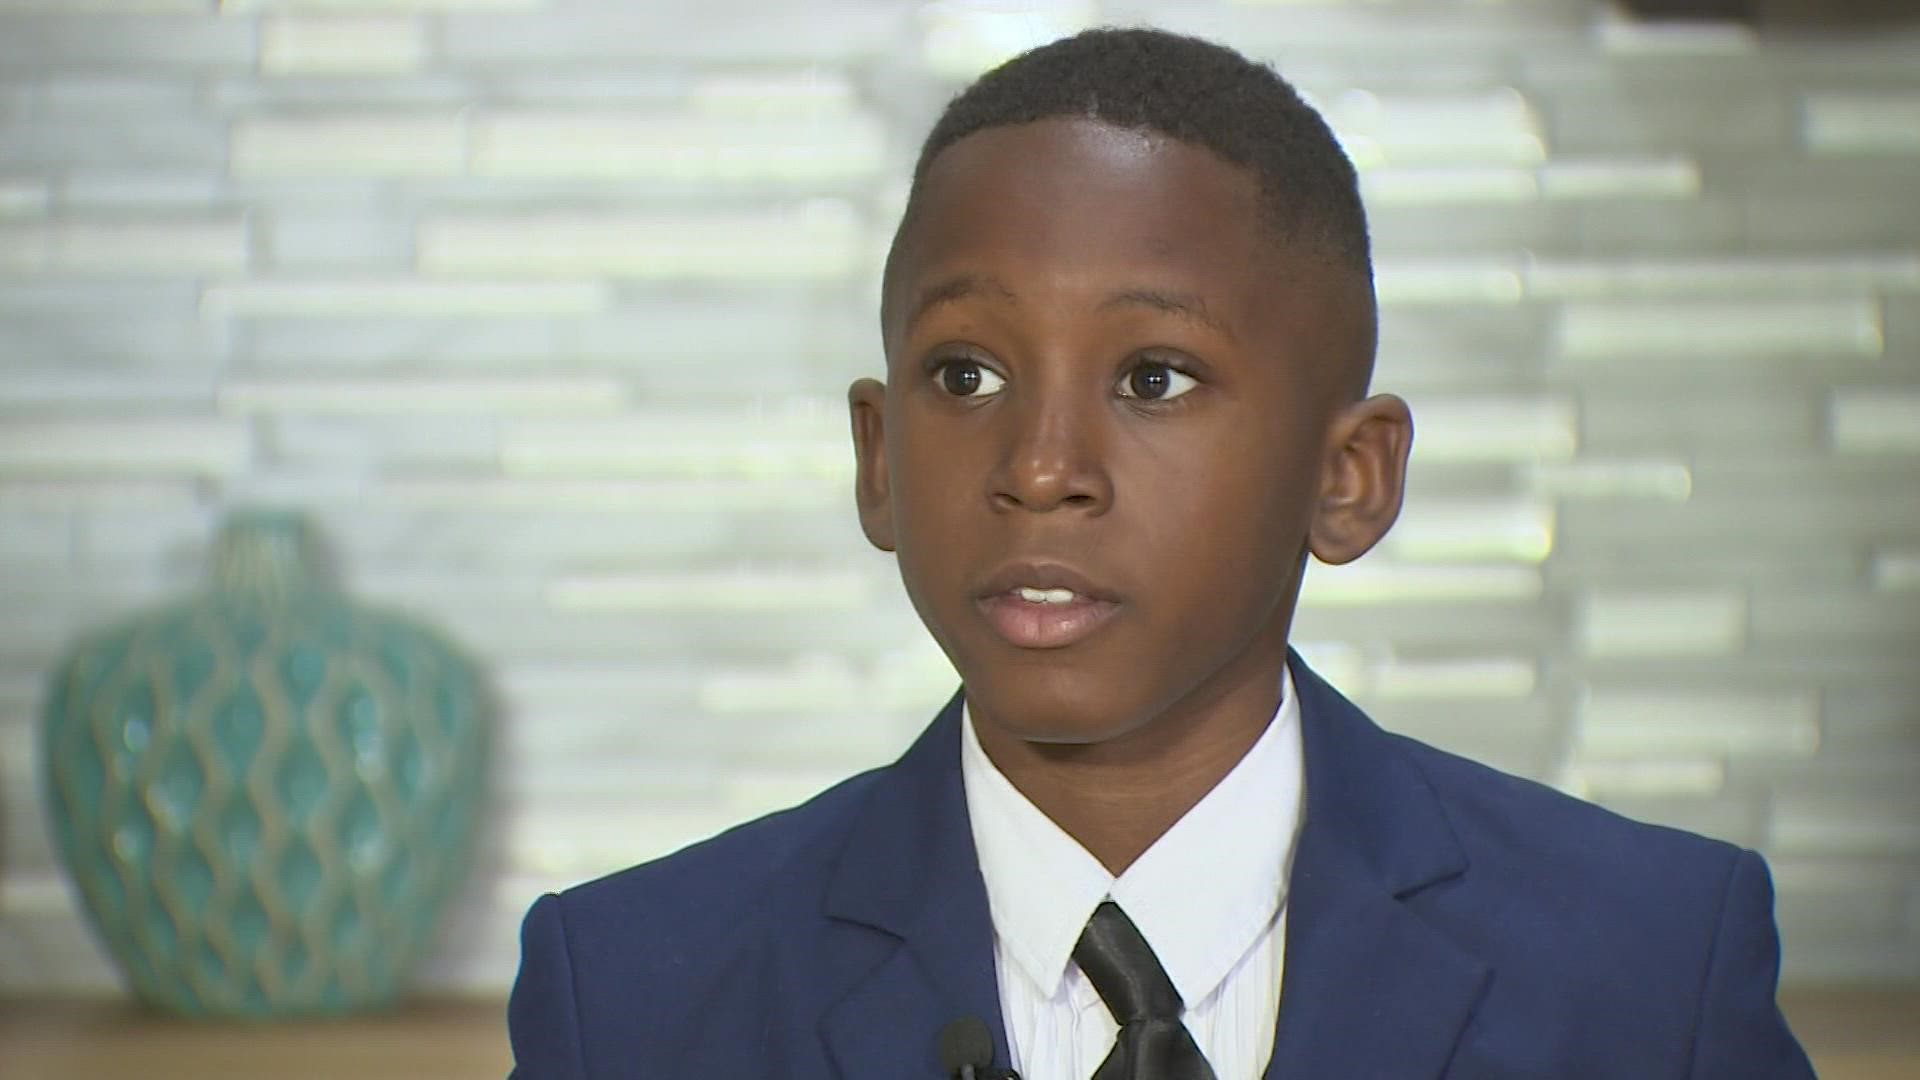 “We are not where we should be, but thank God we are not where we used to be,” 10-year-old Ronnie Williams said during his speech.